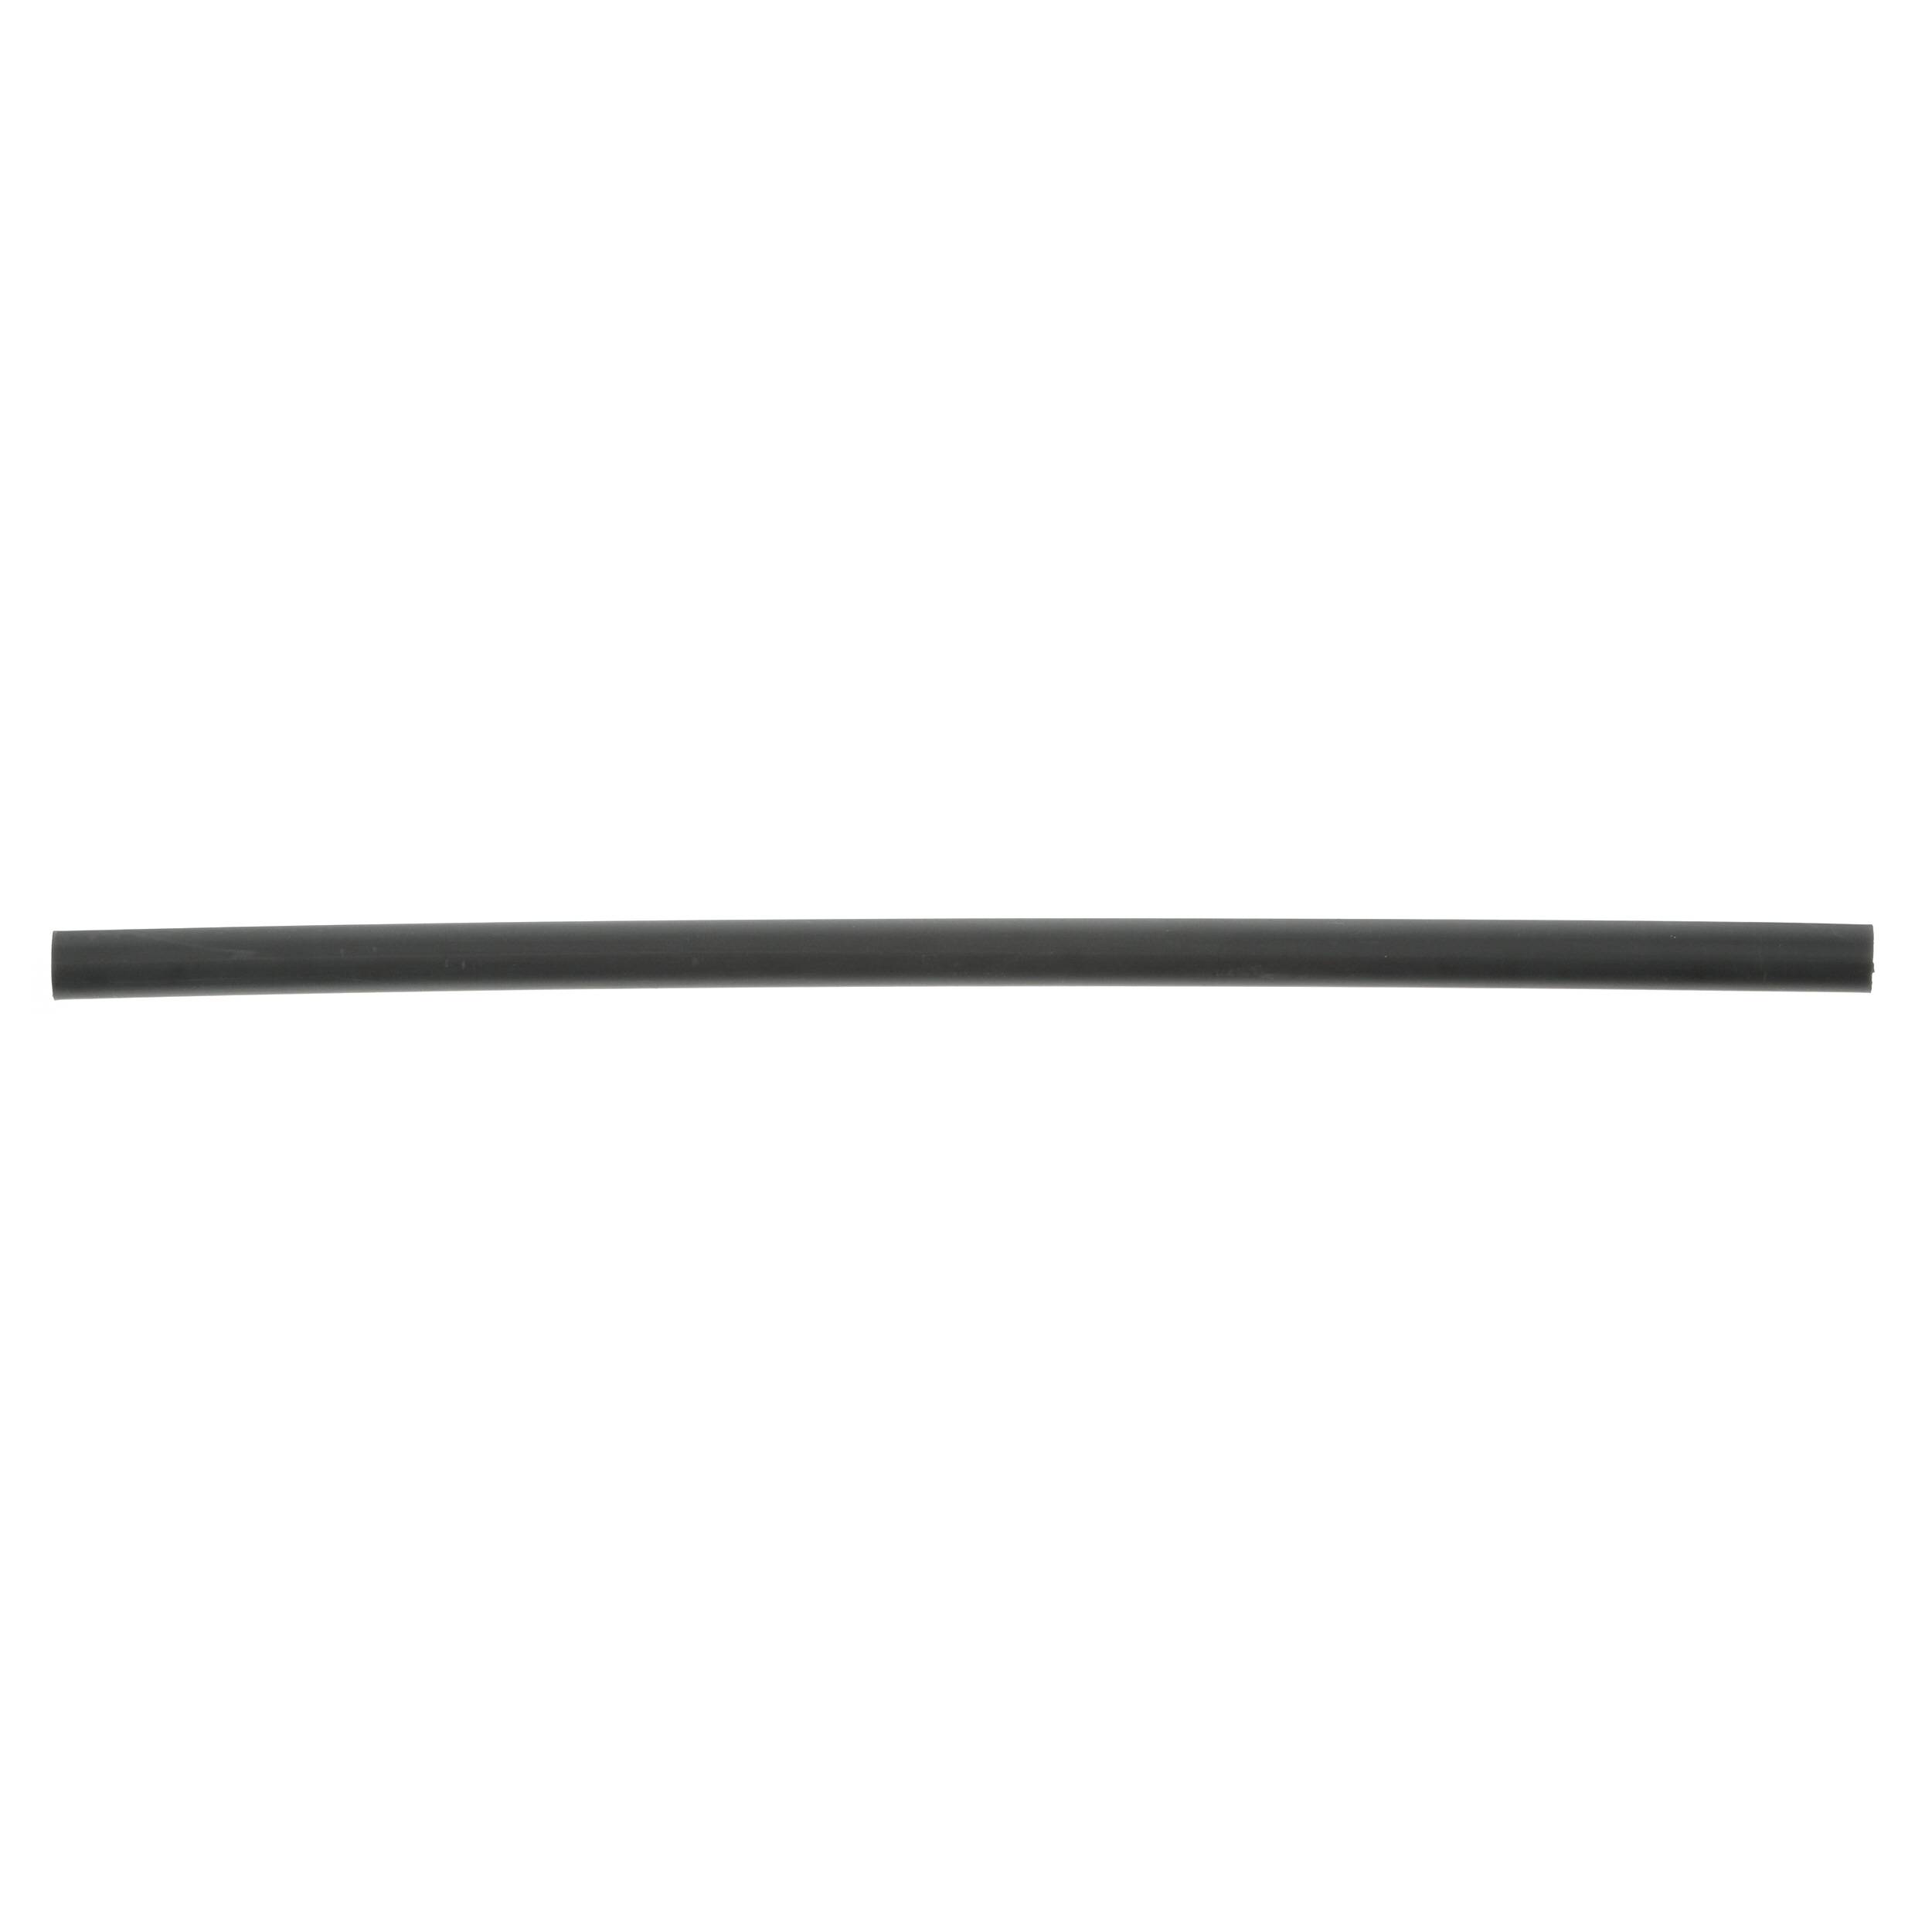 Panduit® Wet-Shrink™ HST0.8-48-5Y VW-1 Adhesive Lined Cross Linked Flame-Retardant Heat Shrink Tubing, 3/4 in ID Expanded, 0.22 in ID Recovered, 0.09 in THK Wall Recovered, 48 in L, Polyolefin, Black